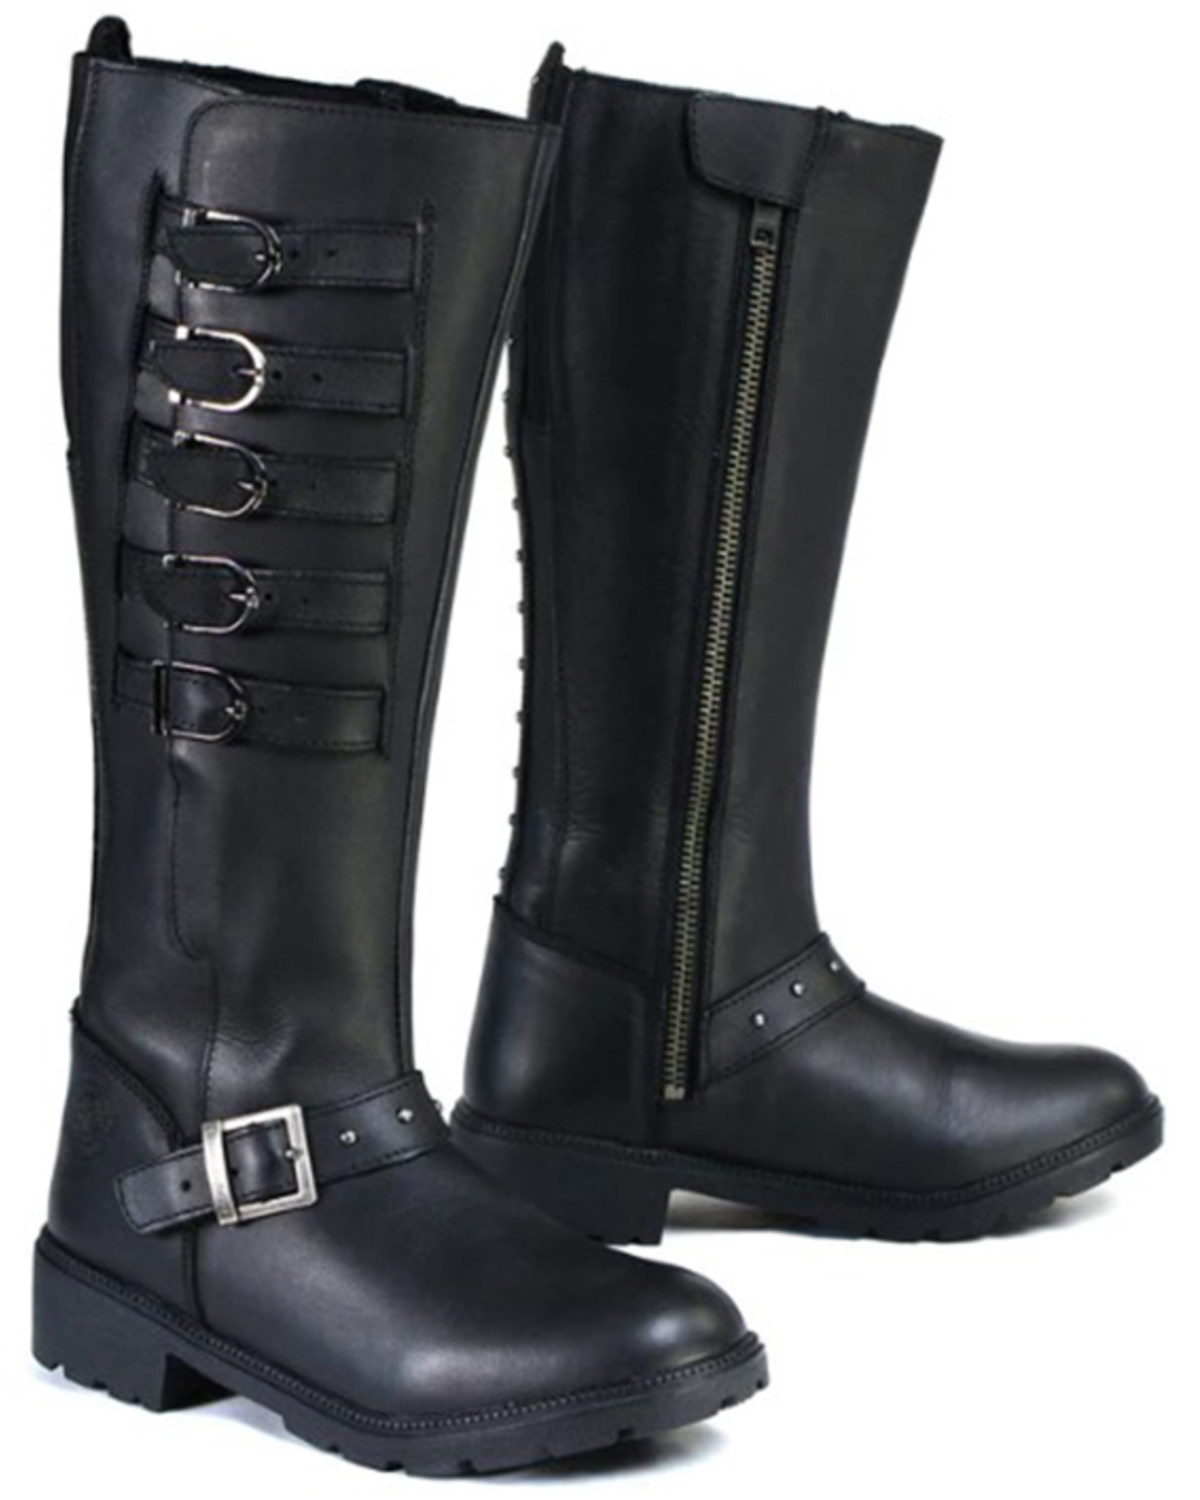 Milwaukee Leather Women's 17" Side Strap Riding Waterproof Boots